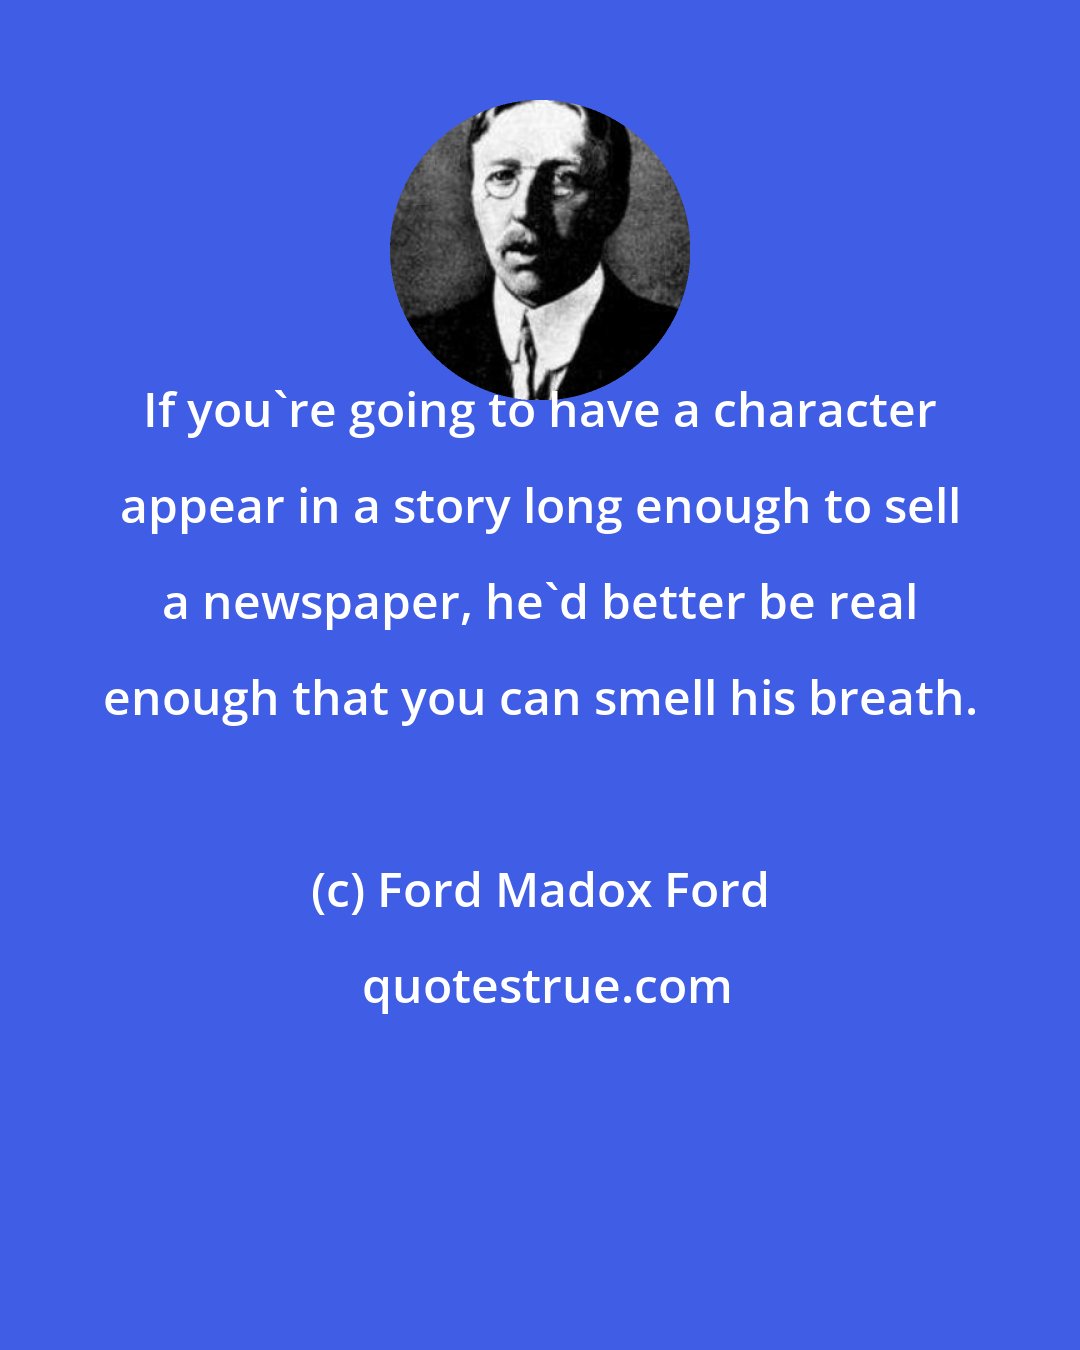 Ford Madox Ford: If you're going to have a character appear in a story long enough to sell a newspaper, he'd better be real enough that you can smell his breath.